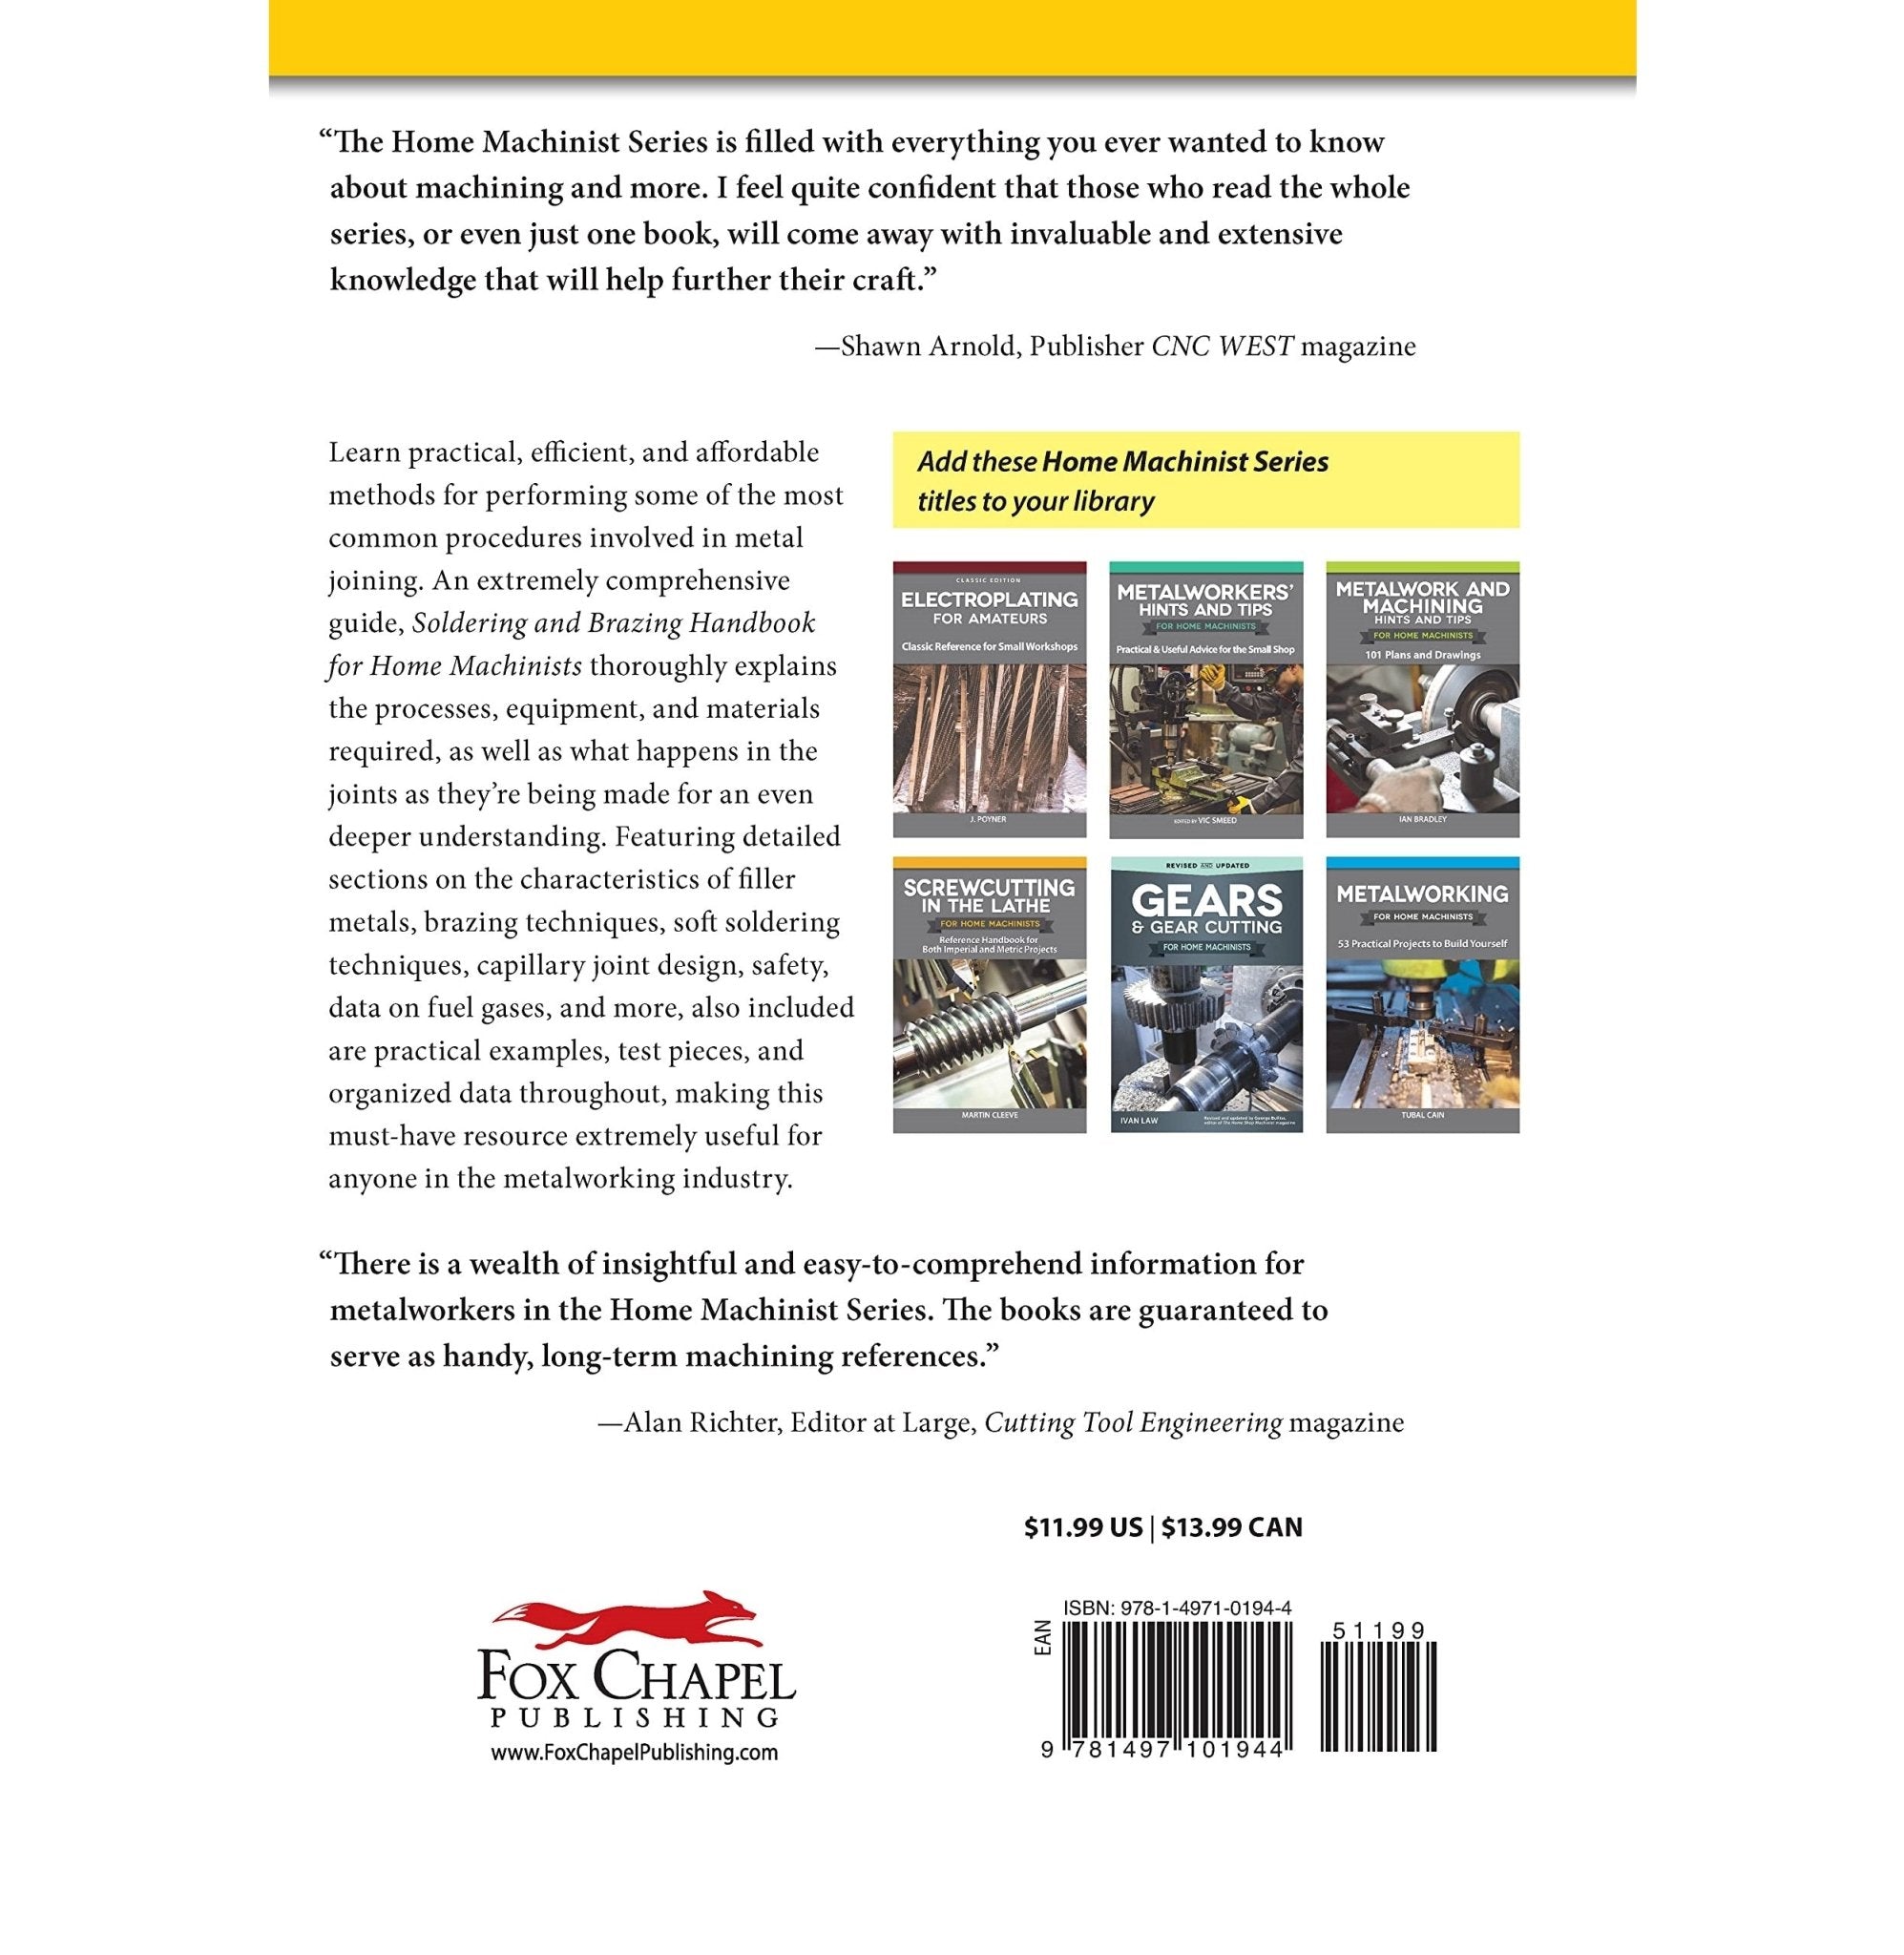 Soldering and Brazing Handbook for Home Machinists